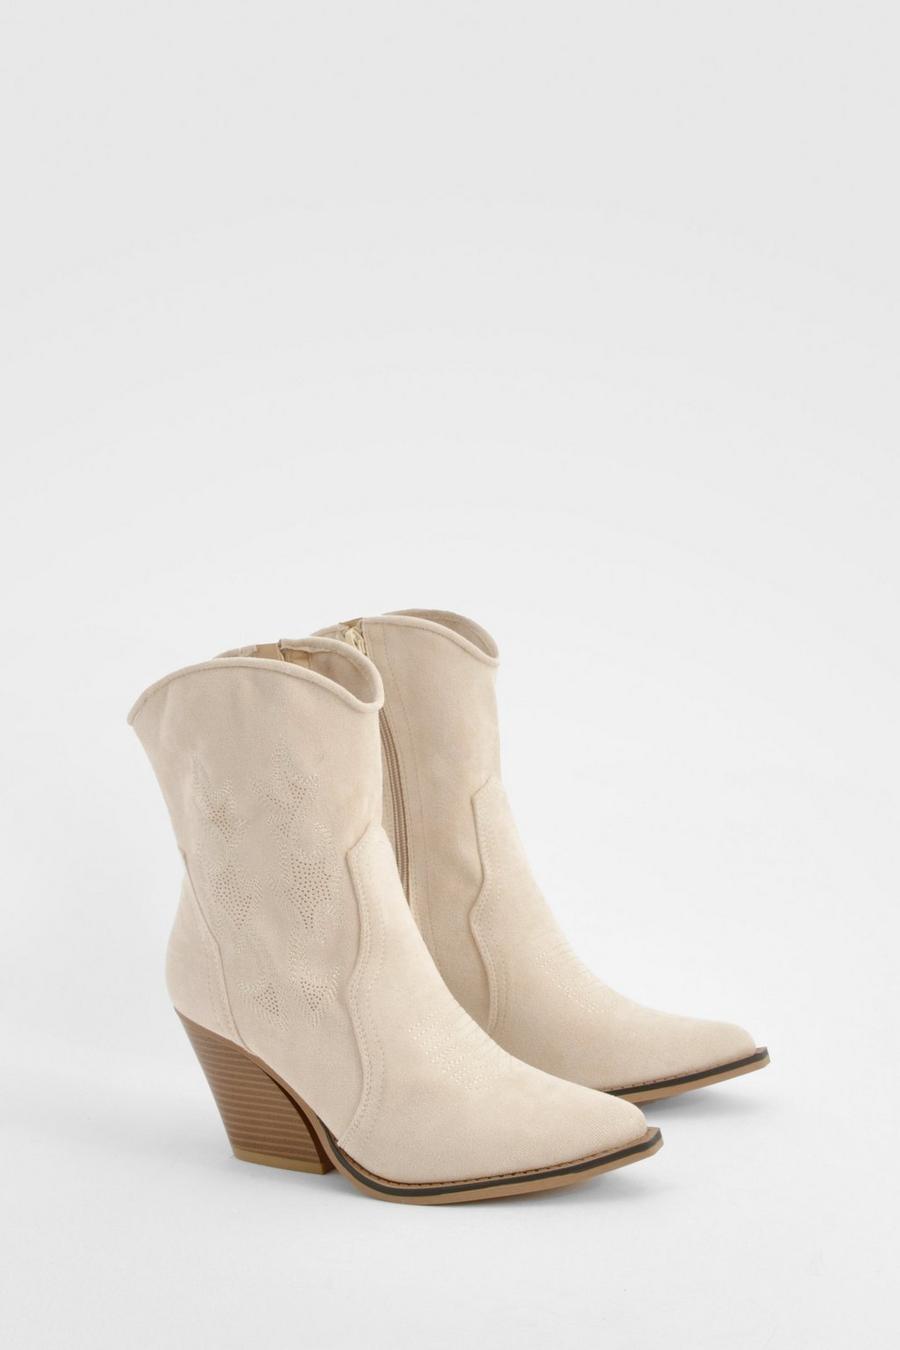 Taupe Embroidered Calf High Cowboy Boots